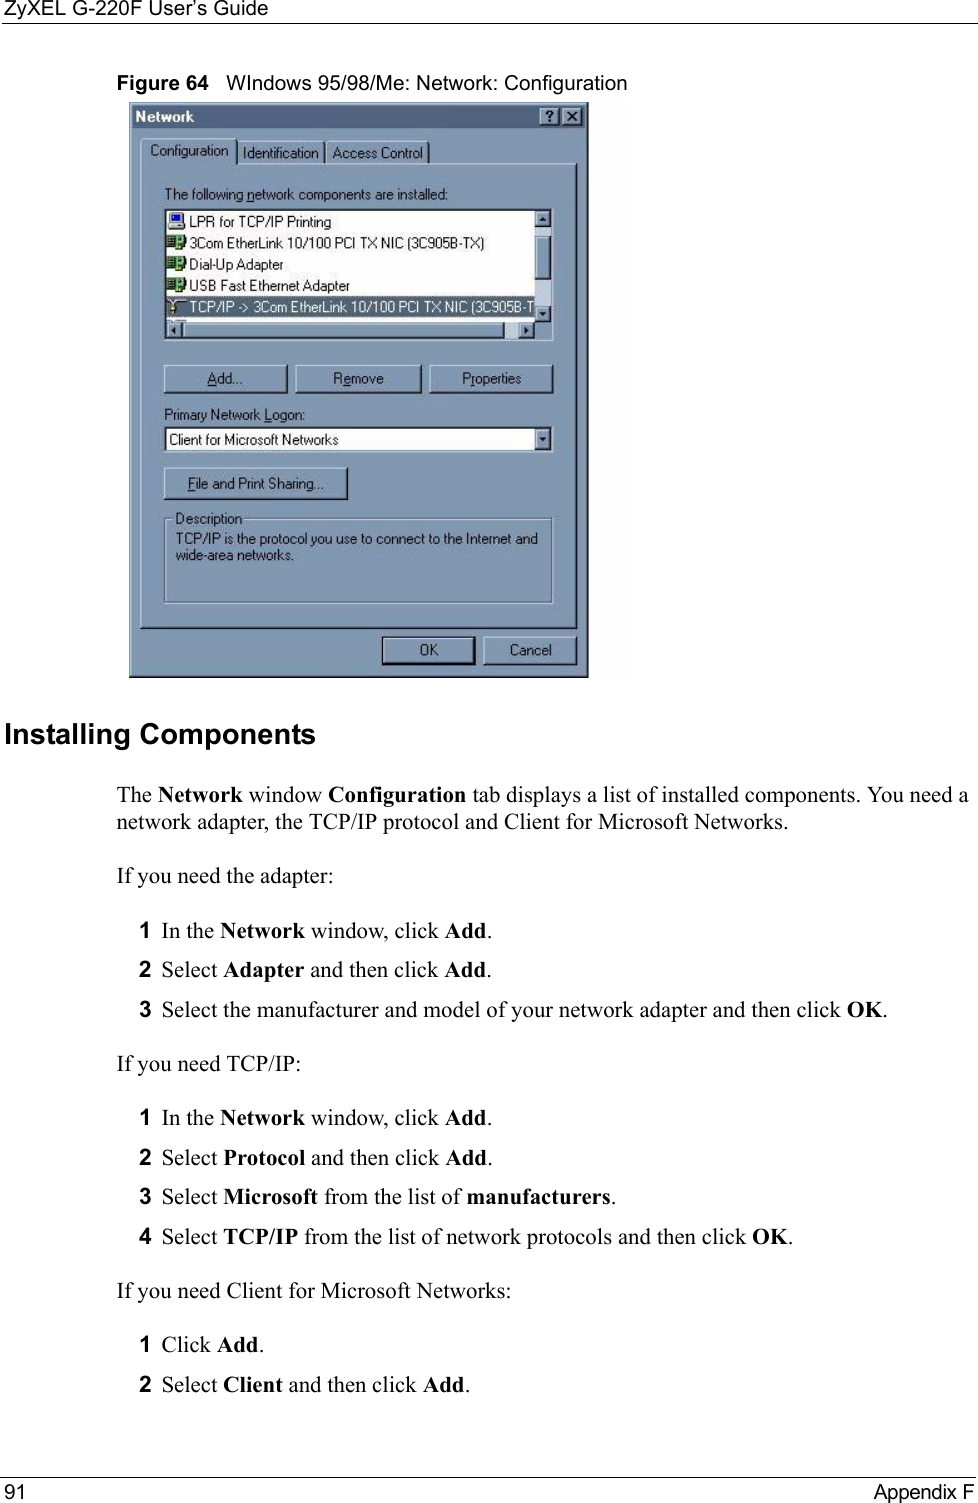 ZyXEL G-220F User’s Guide91 Appendix FFigure 64   WIndows 95/98/Me: Network: ConfigurationInstalling ComponentsThe Network window Configuration tab displays a list of installed components. You need a network adapter, the TCP/IP protocol and Client for Microsoft Networks.If you need the adapter:1In the Network window, click Add.2Select Adapter and then click Add.3Select the manufacturer and model of your network adapter and then click OK.If you need TCP/IP:1In the Network window, click Add.2Select Protocol and then click Add.3Select Microsoft from the list of manufacturers.4Select TCP/IP from the list of network protocols and then click OK.If you need Client for Microsoft Networks:1Click Add.2Select Client and then click Add.